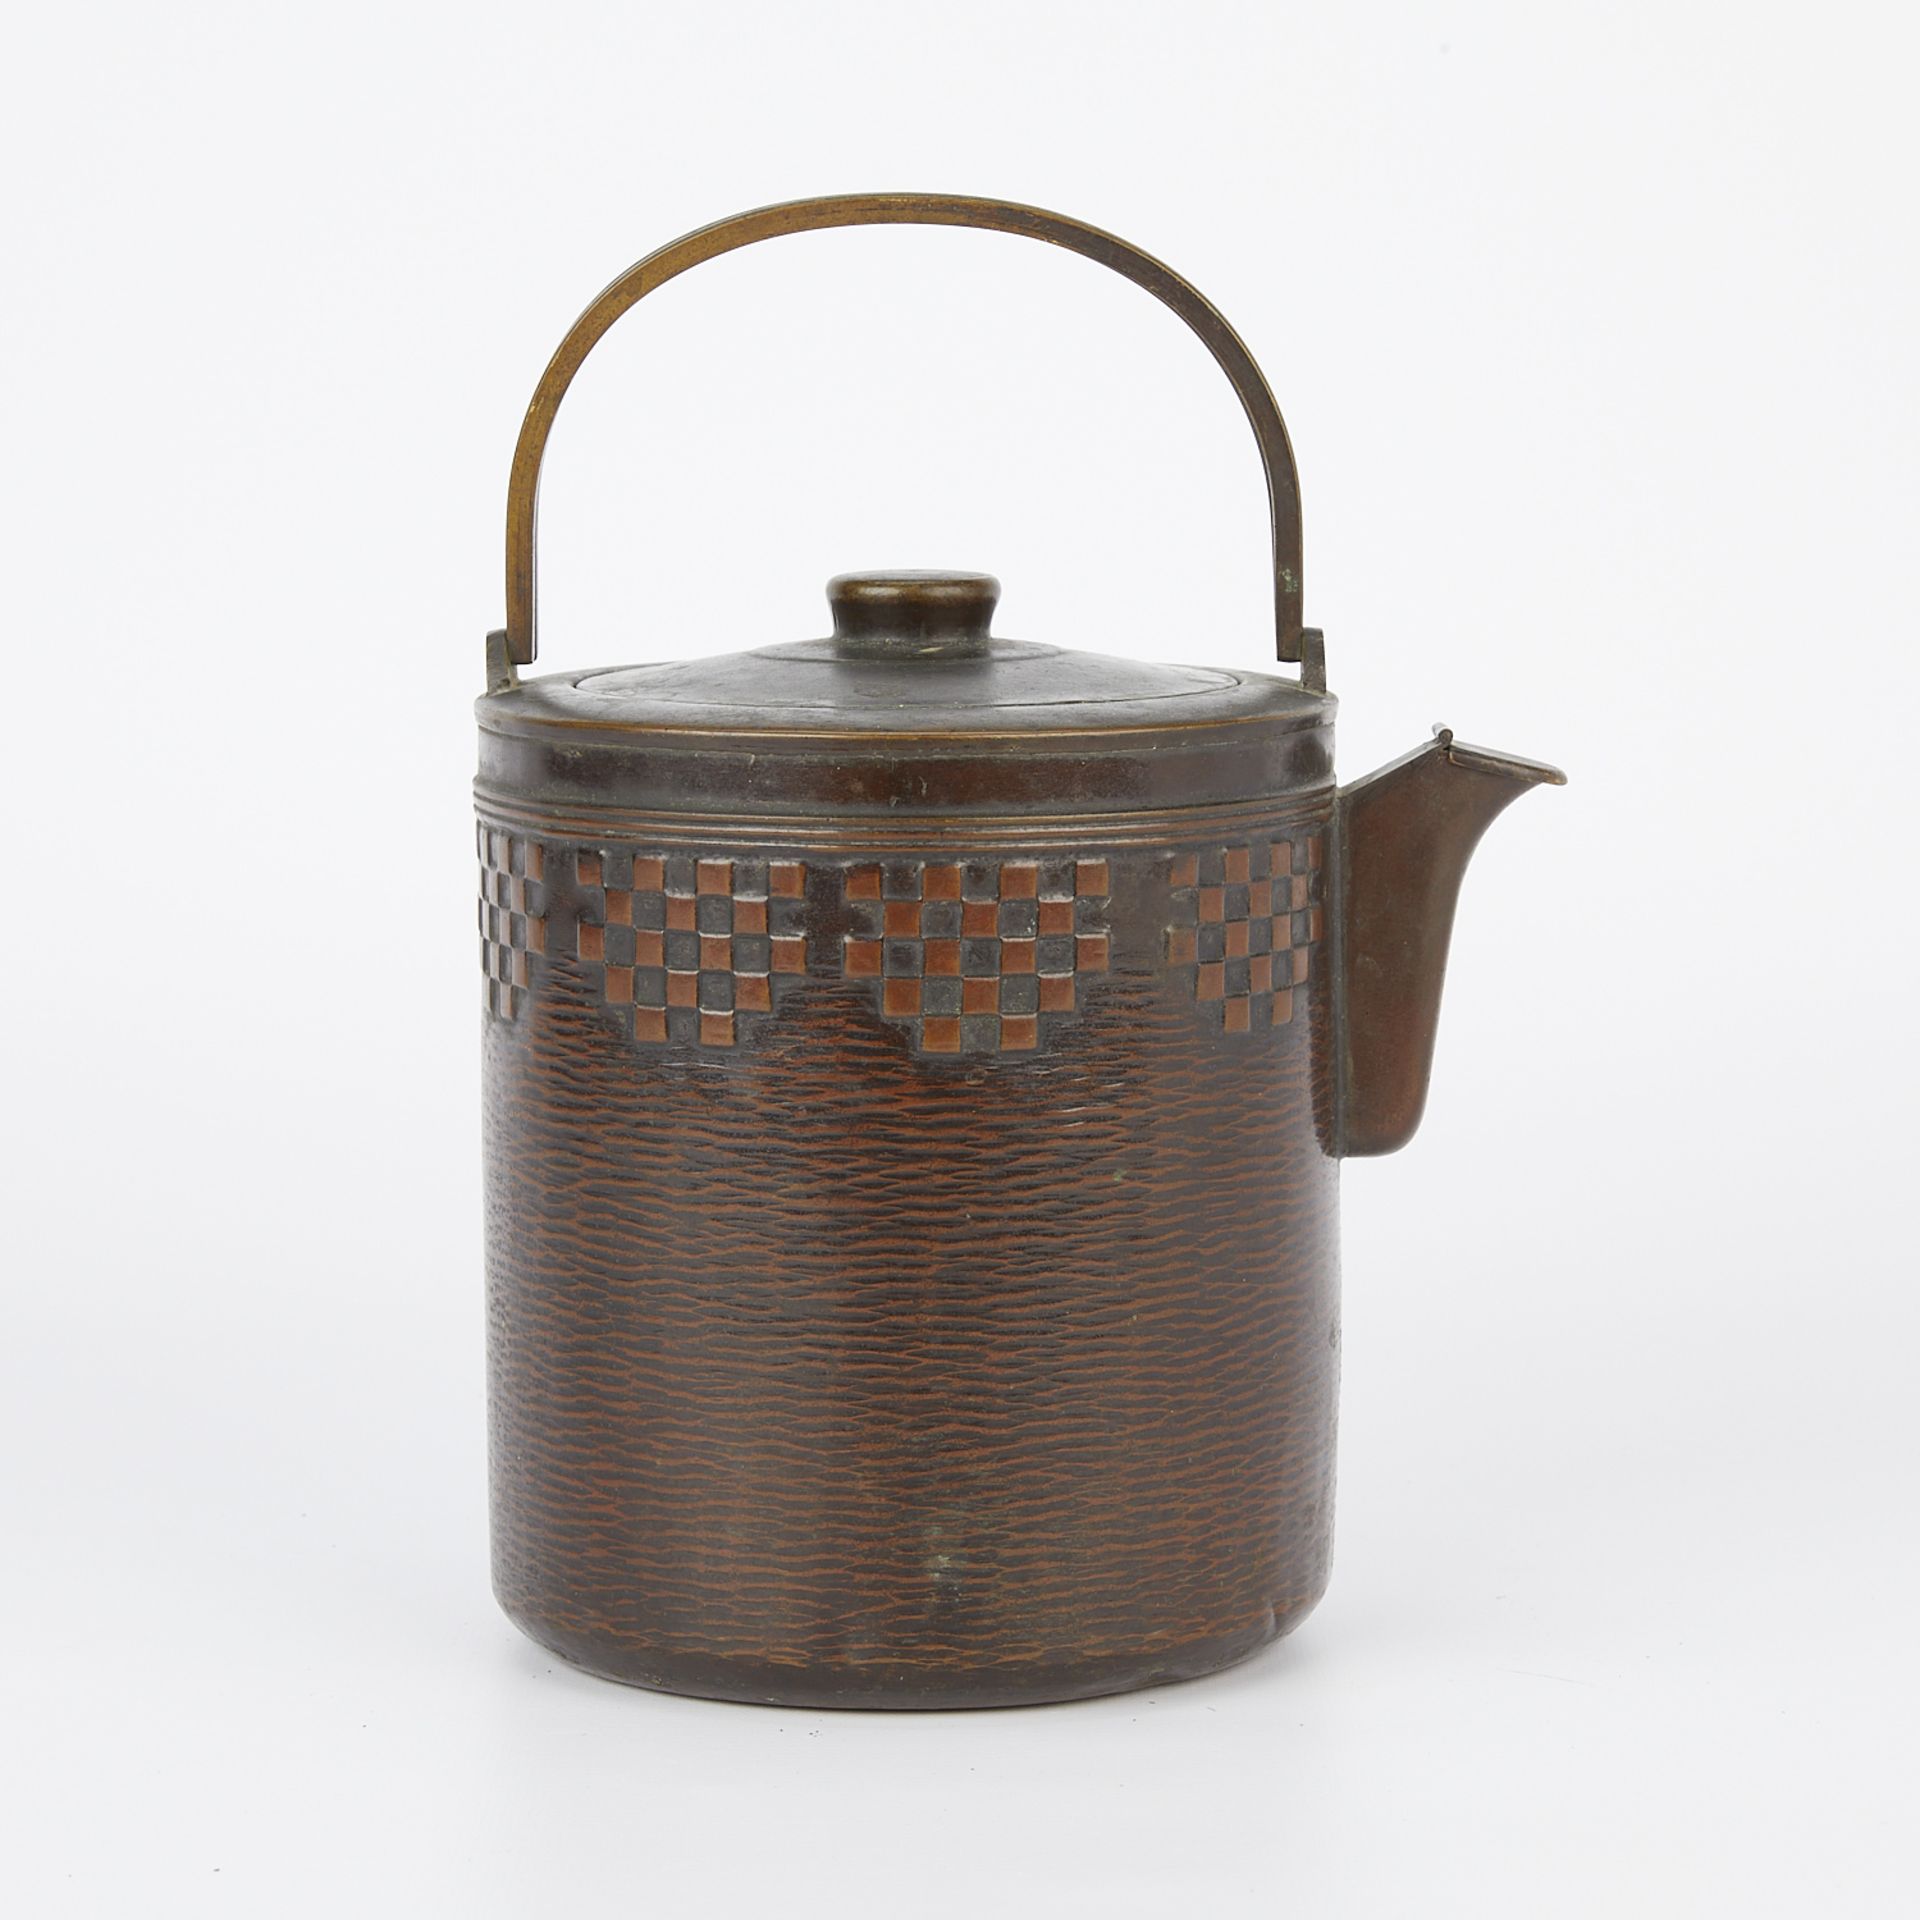 20th c. Japanese Hammered Brass Tea Pot - Image 5 of 13